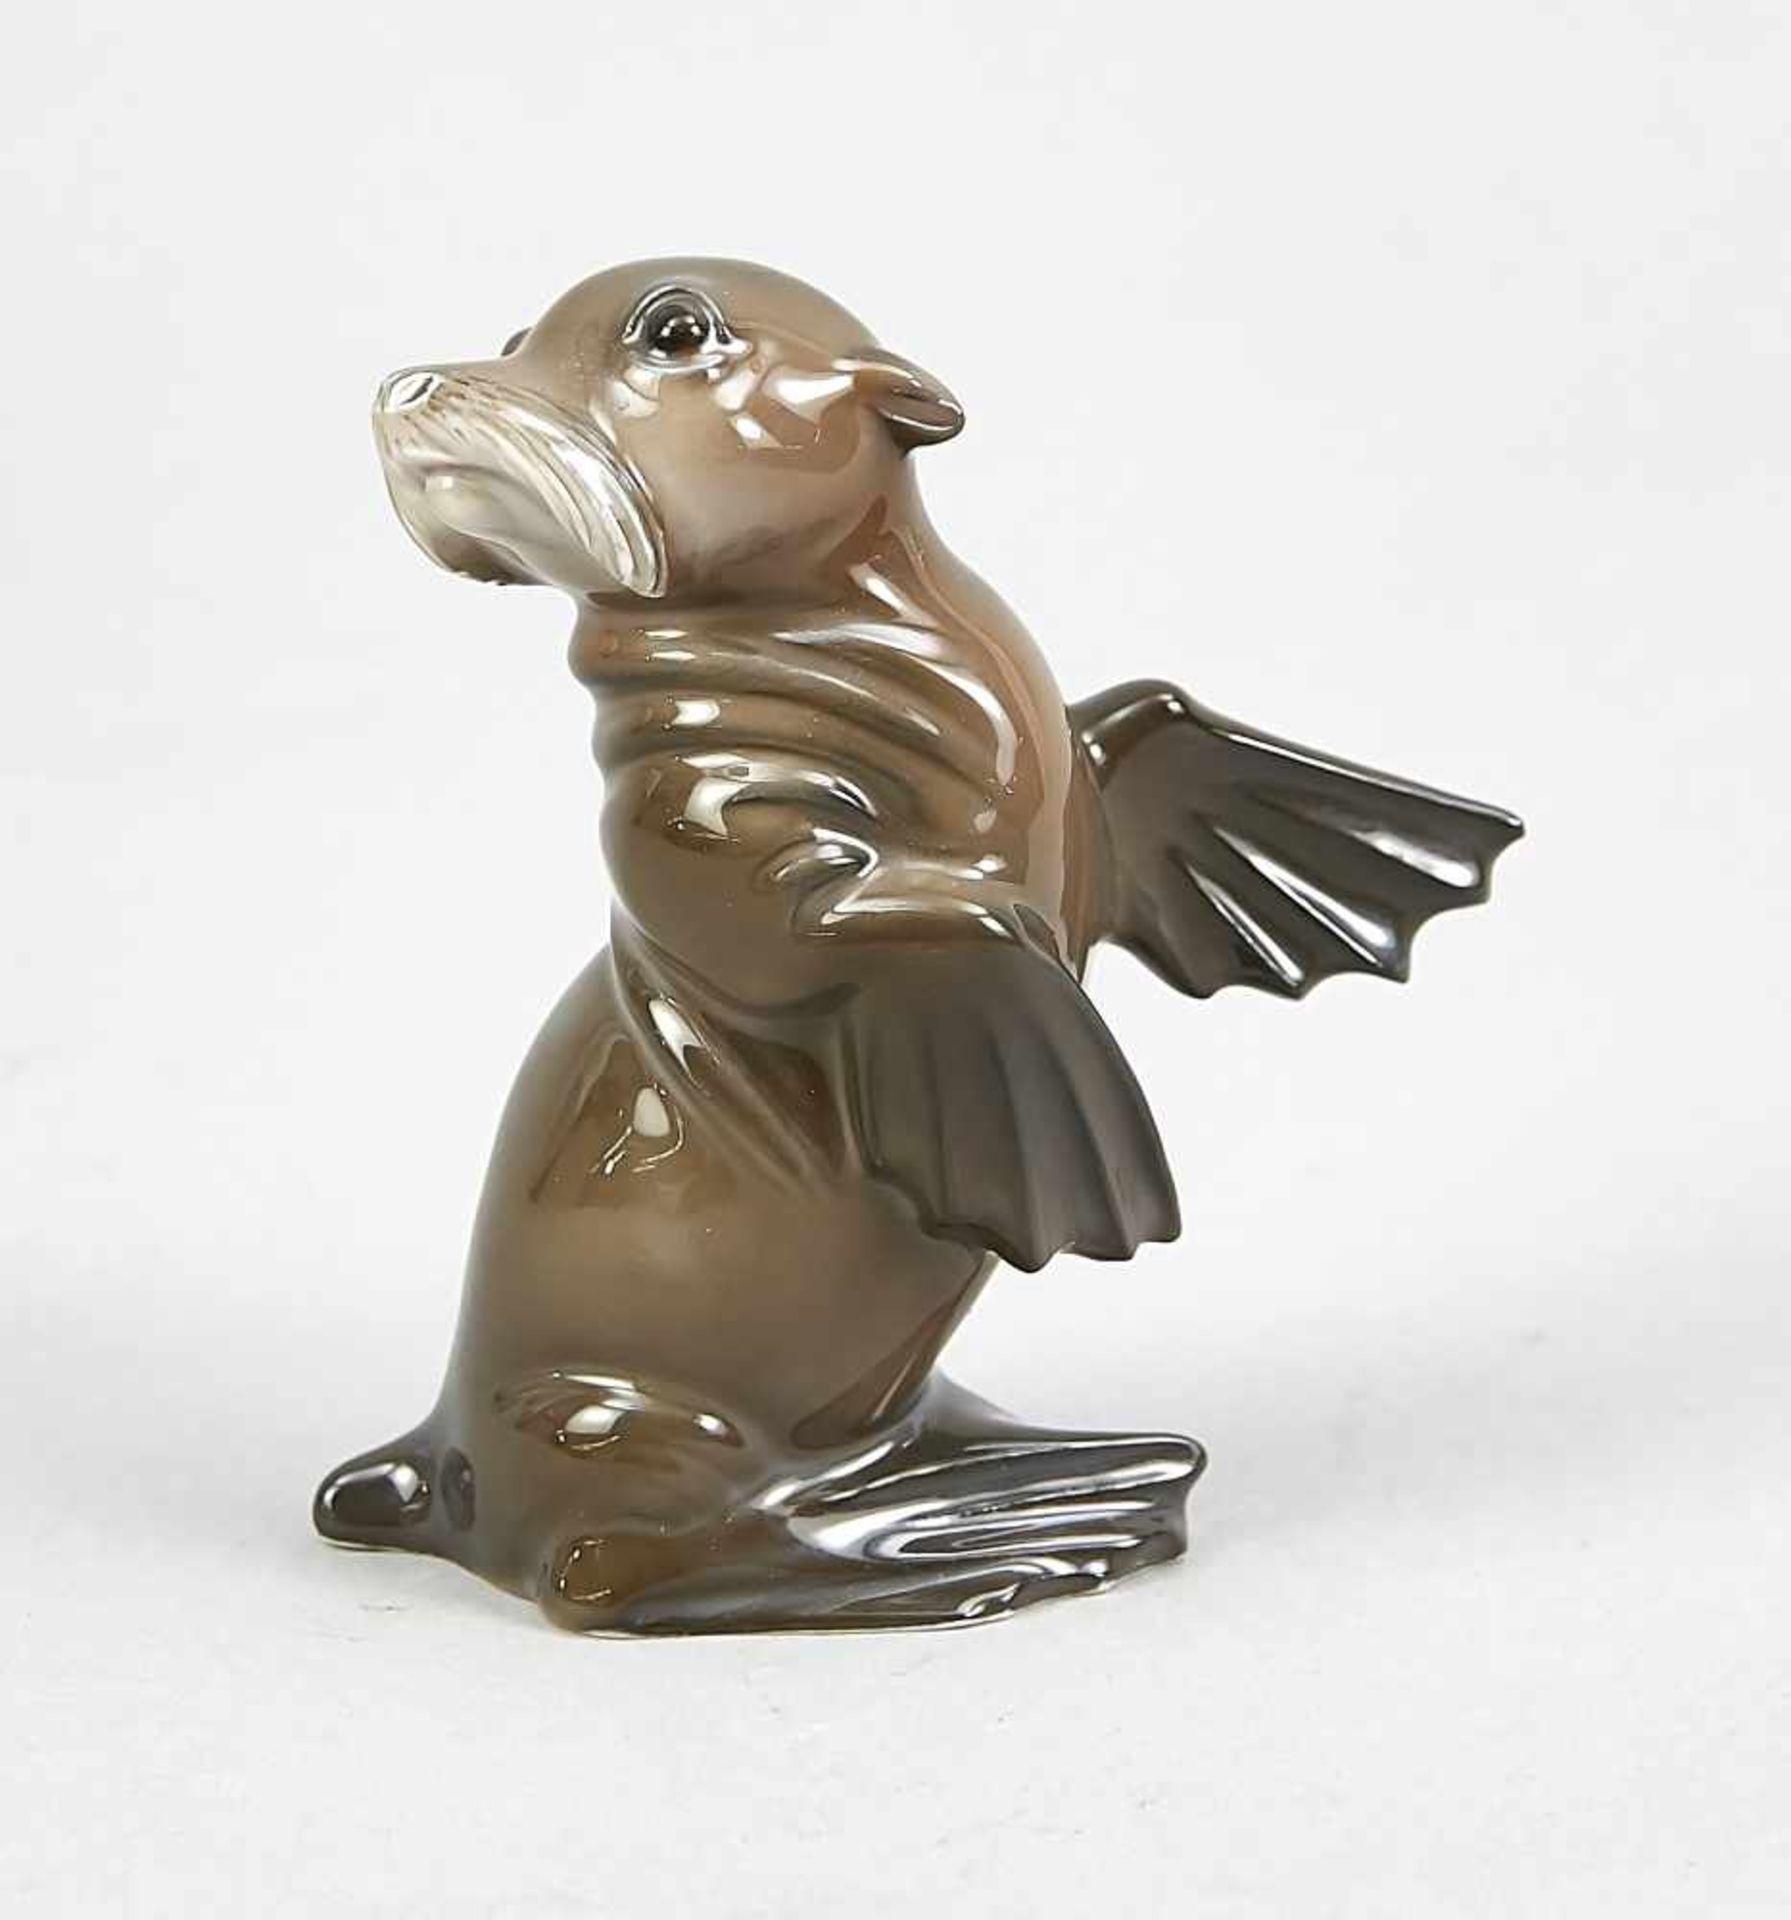 Young sea lion, Rosenthal, Selb mark for 1921-38s, designed by Theodor Kärner, model no.<